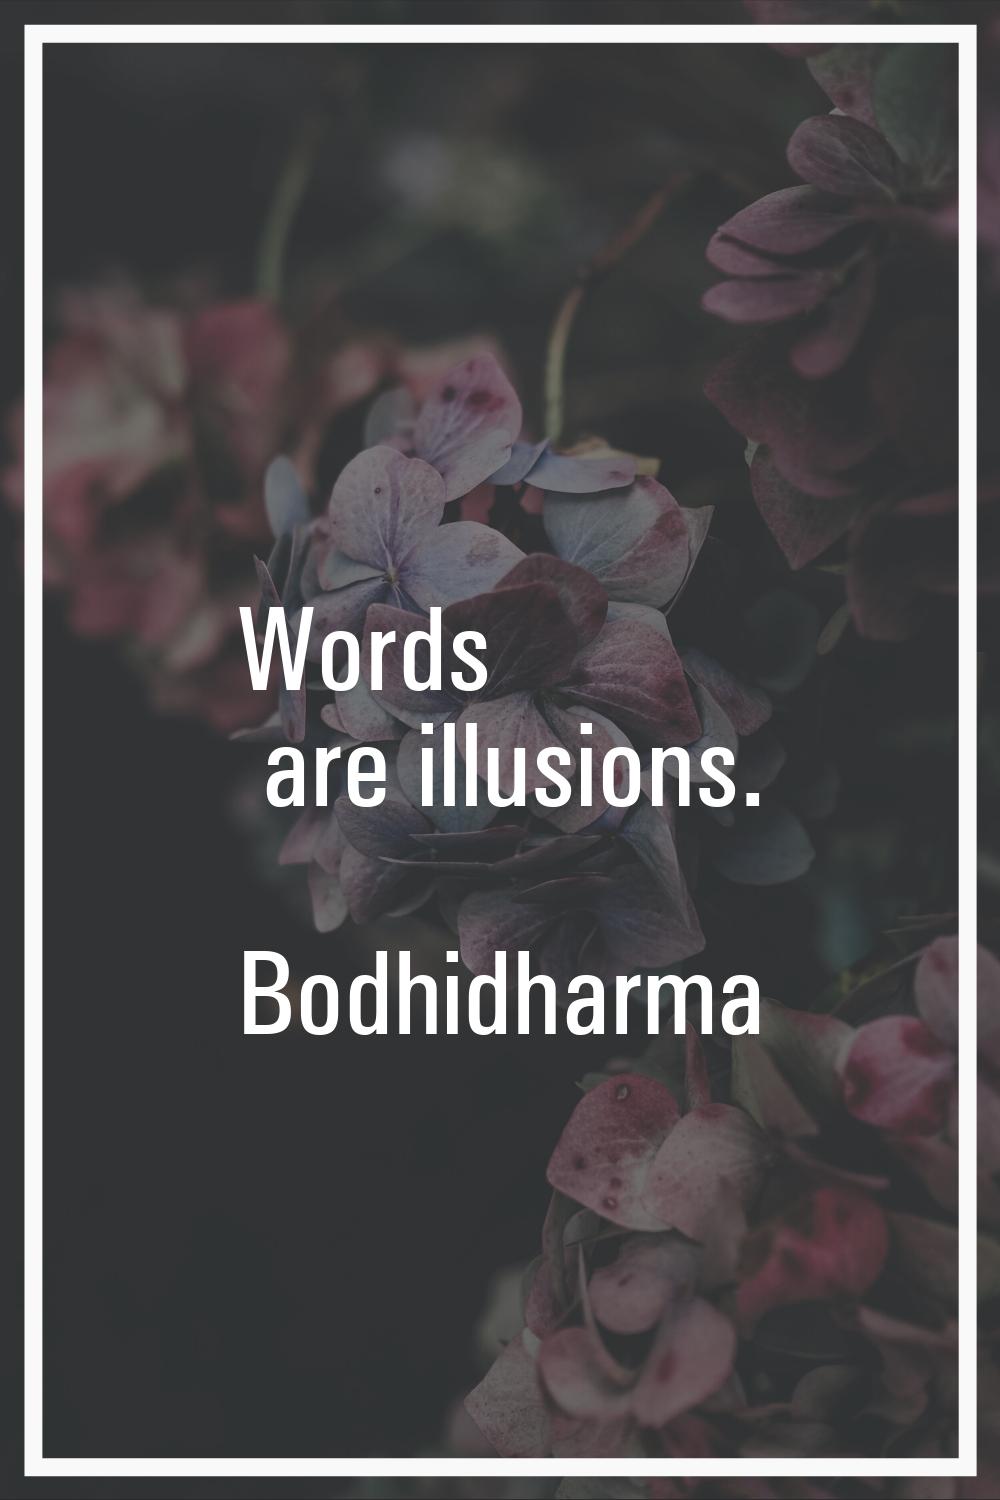 Words are illusions.